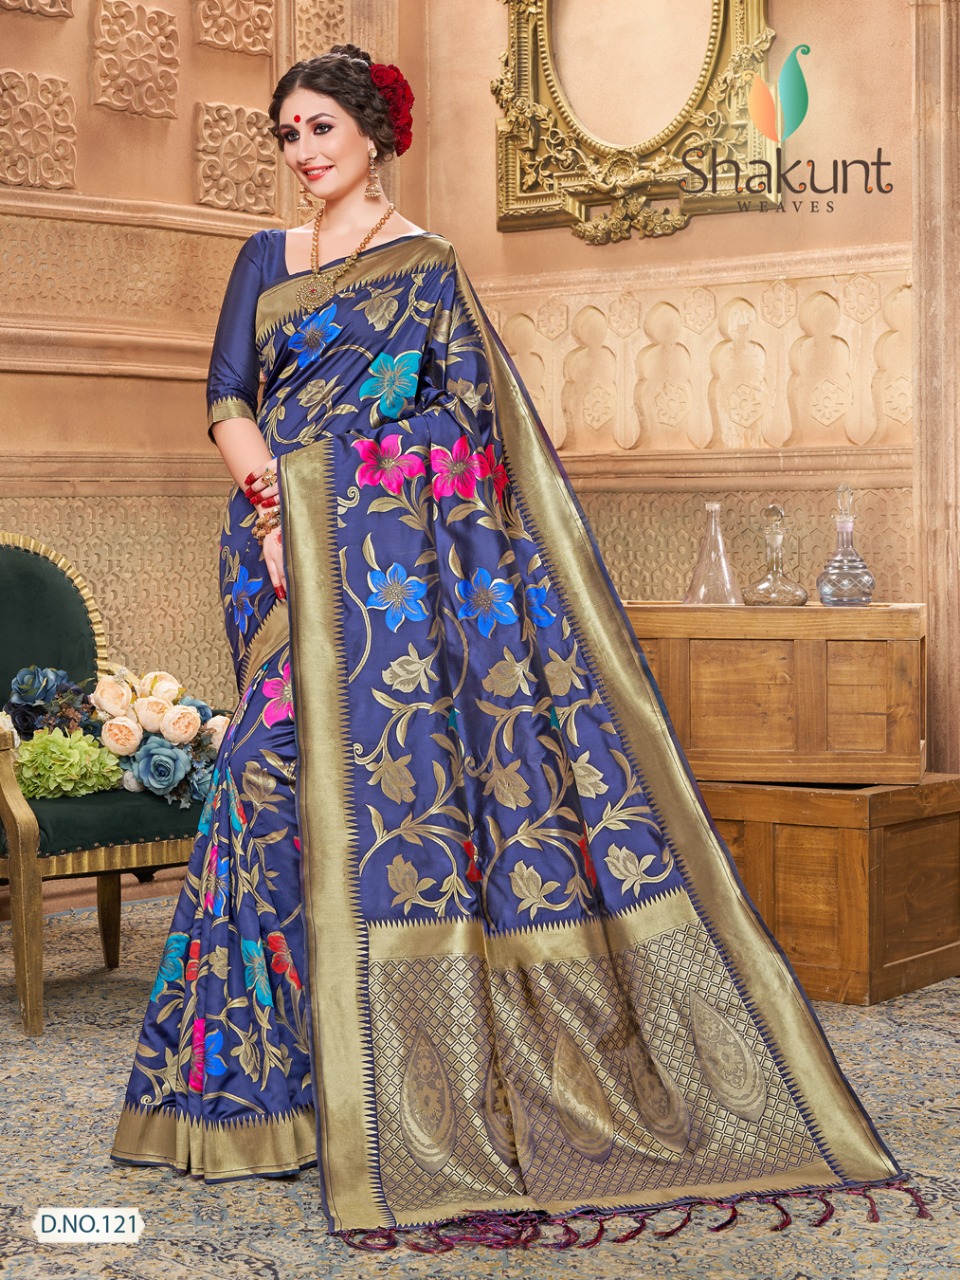 shakubt weaves trishika colorful fancy collection of sarees